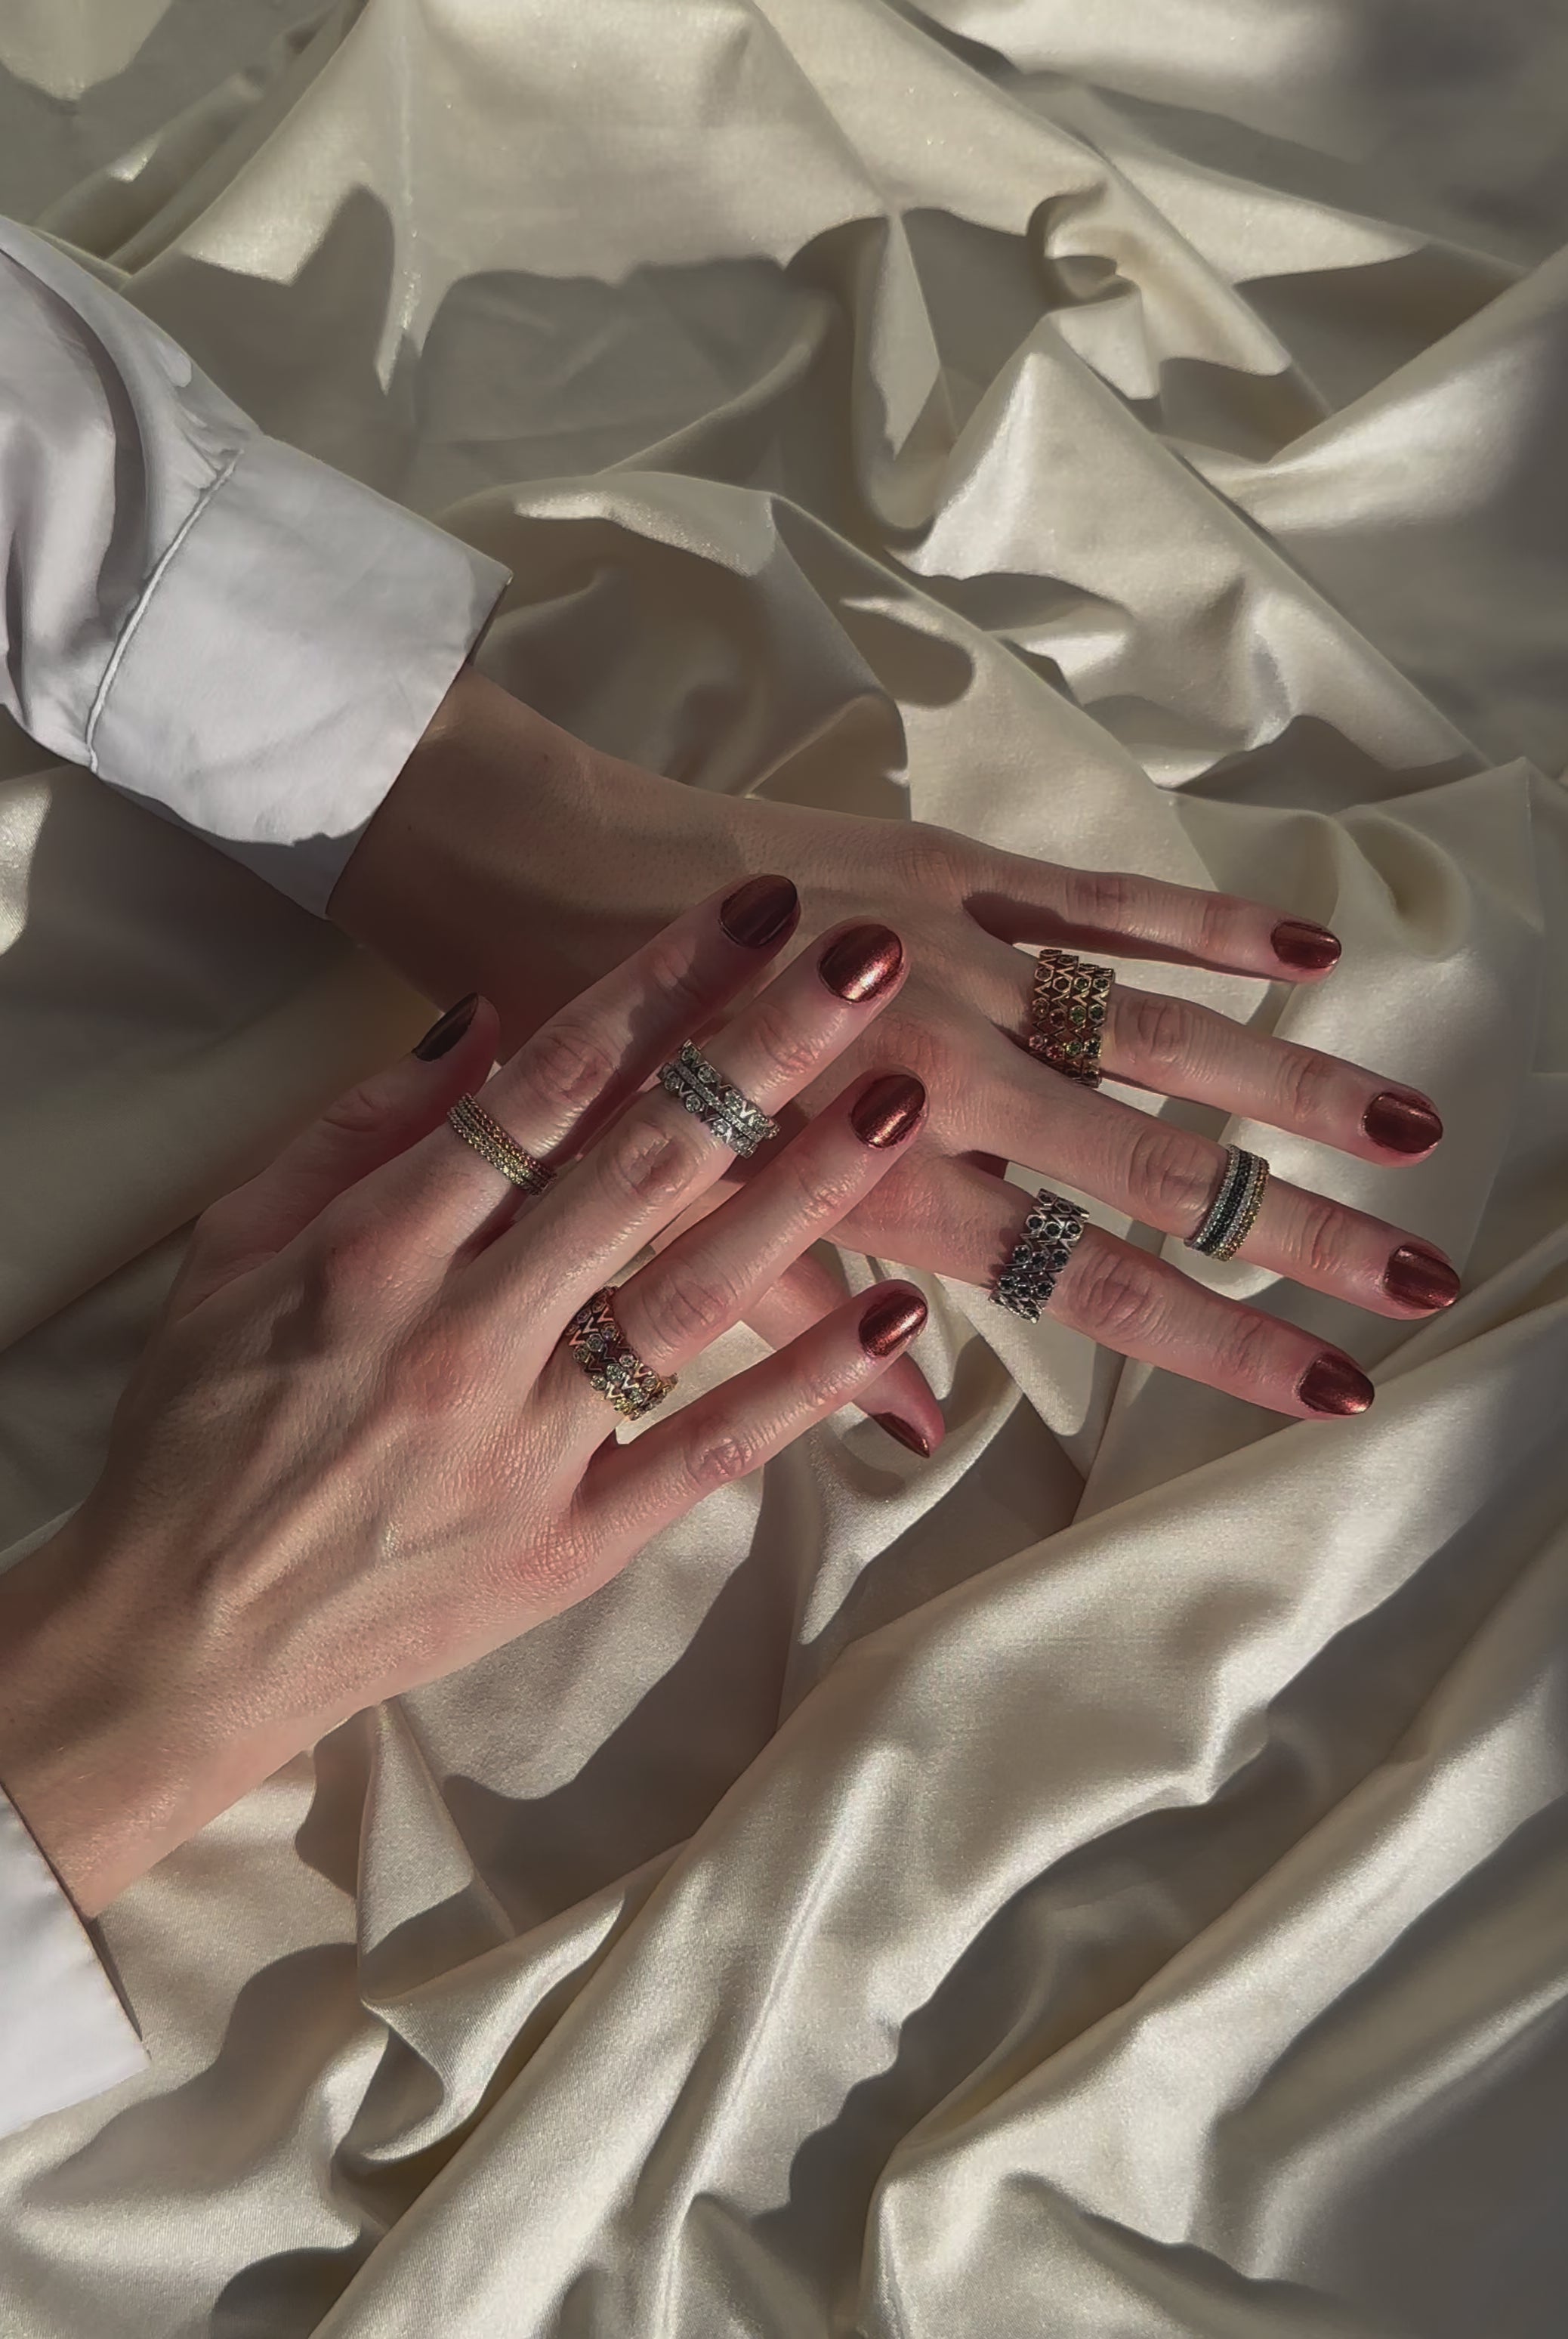 Models wear various stacks of rings as she moves her fingers